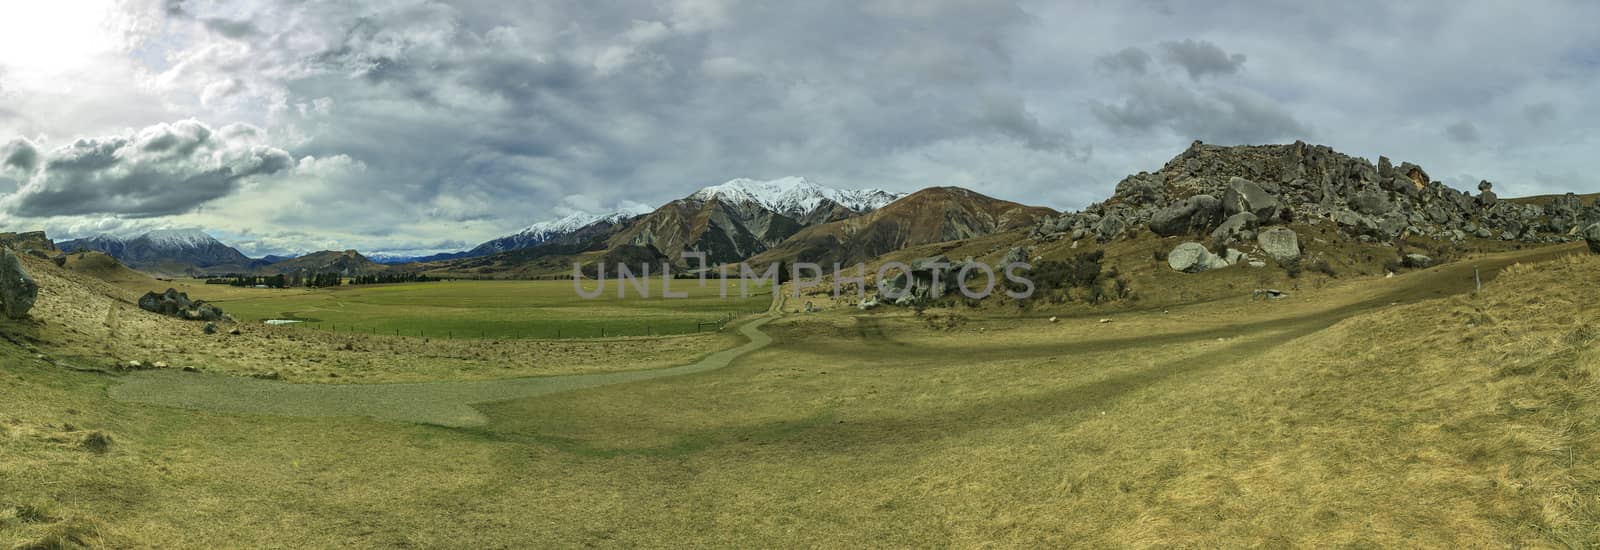 wide angle panorama landscape of castle hill mountain and land s by khunaspix